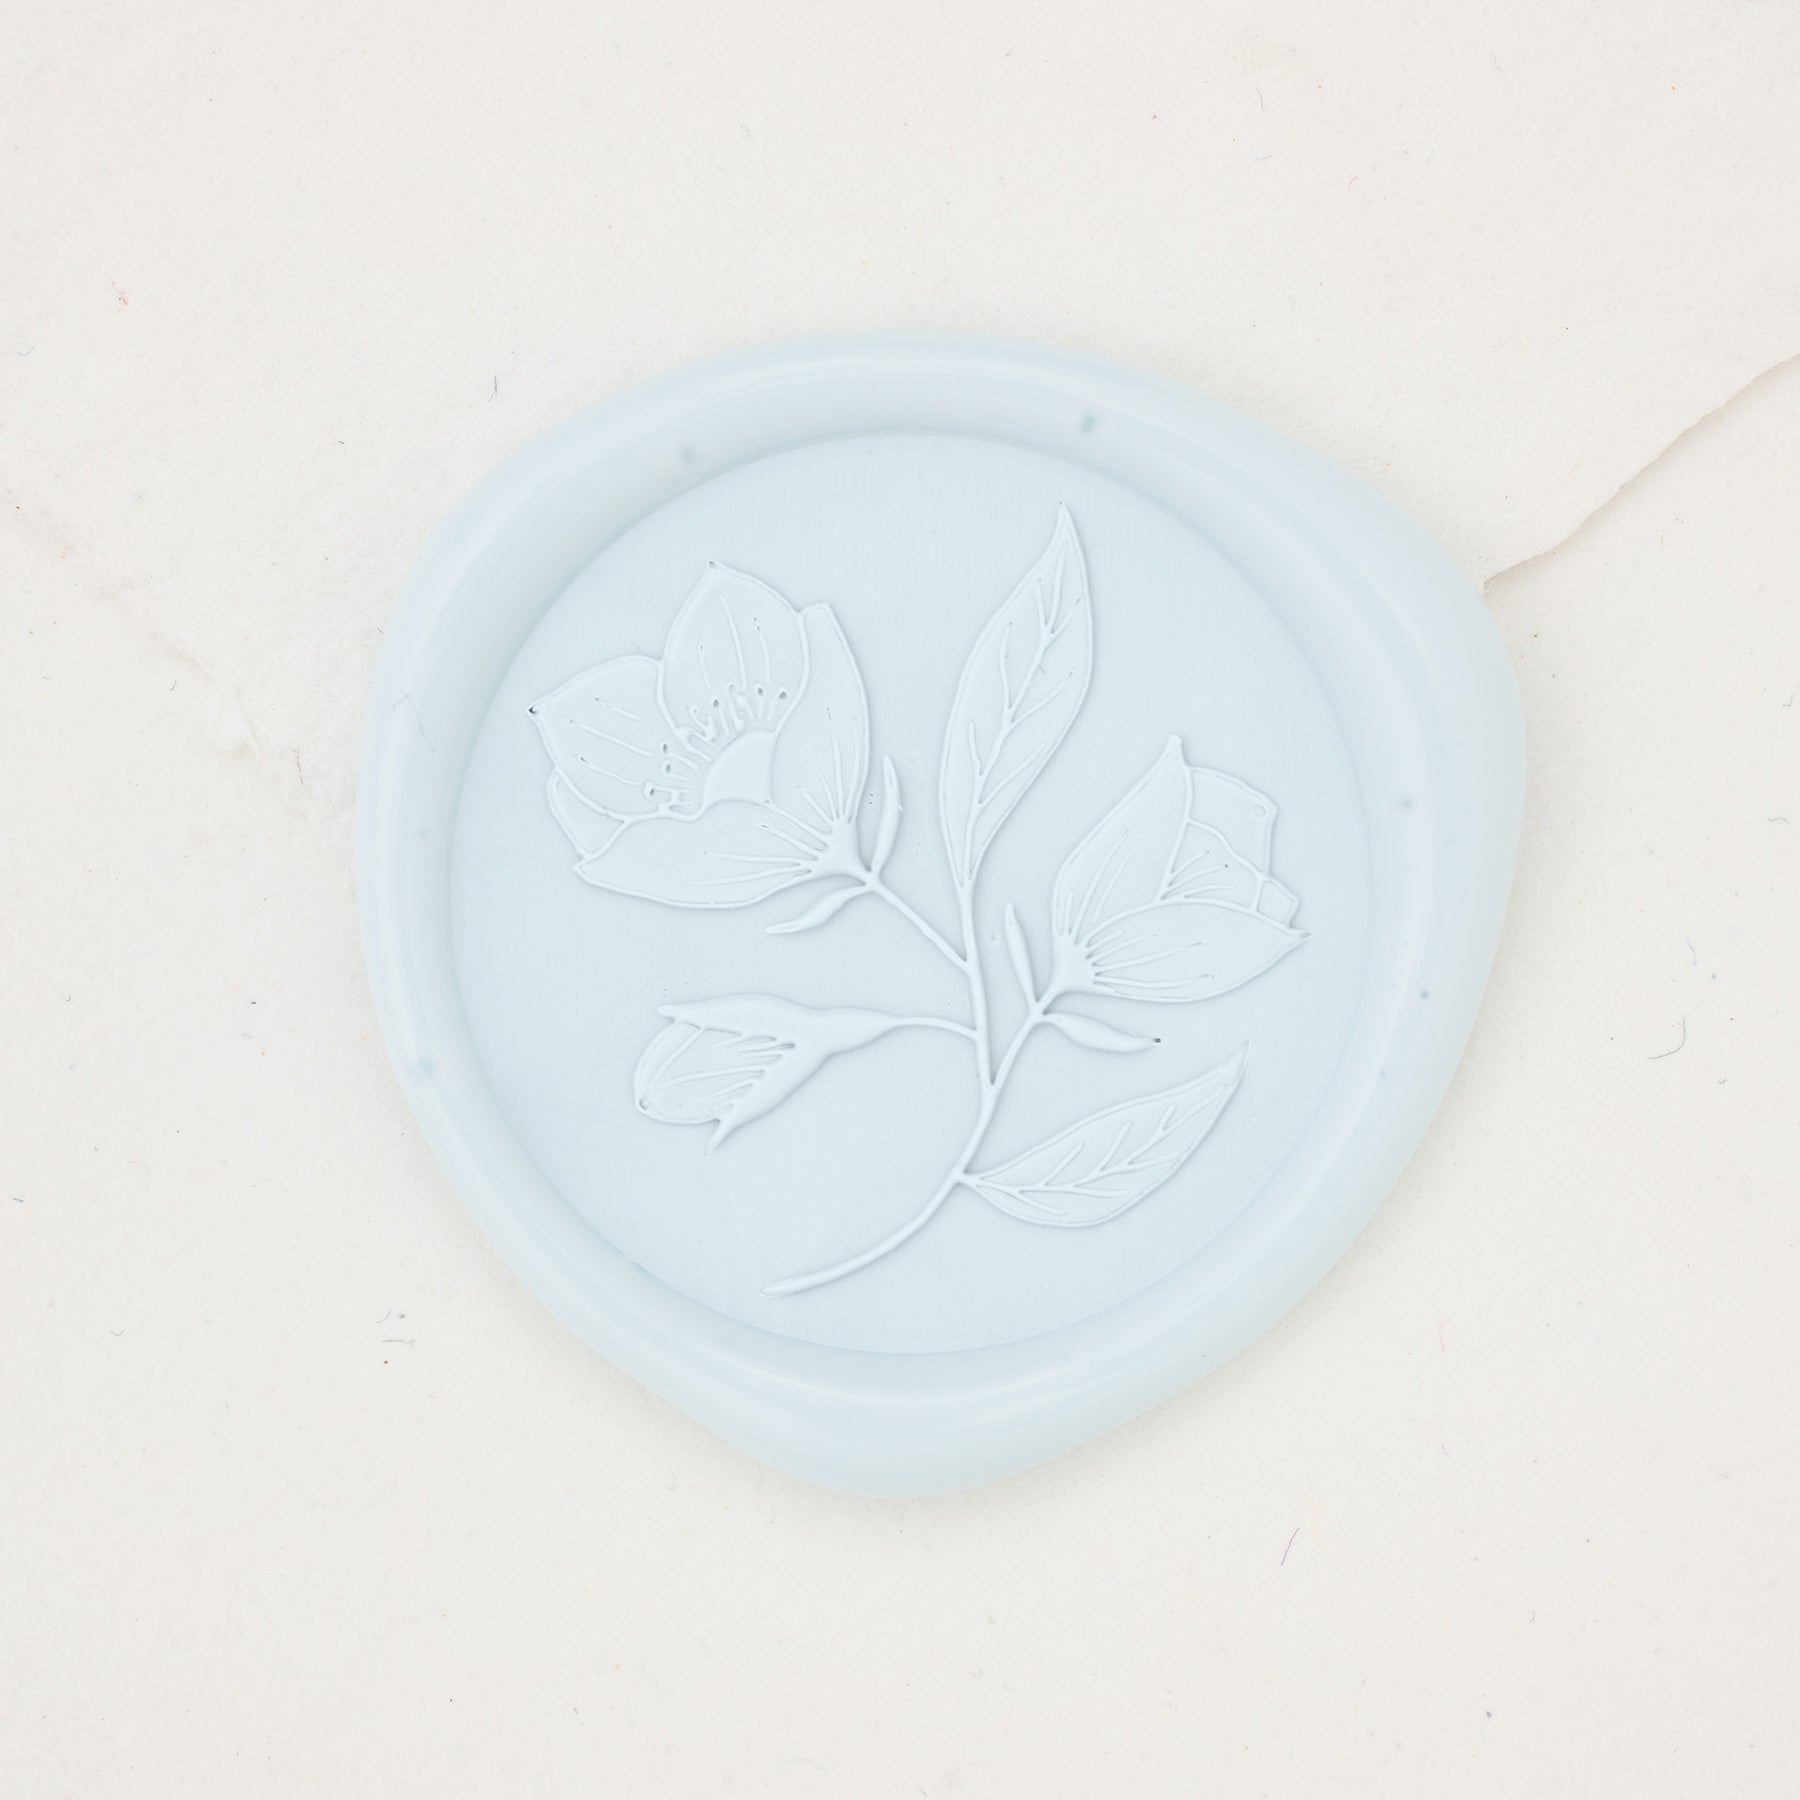 Dusty blue roses wax seal stickers | Seto of 10 Marketplace Wax Seals by  undefined